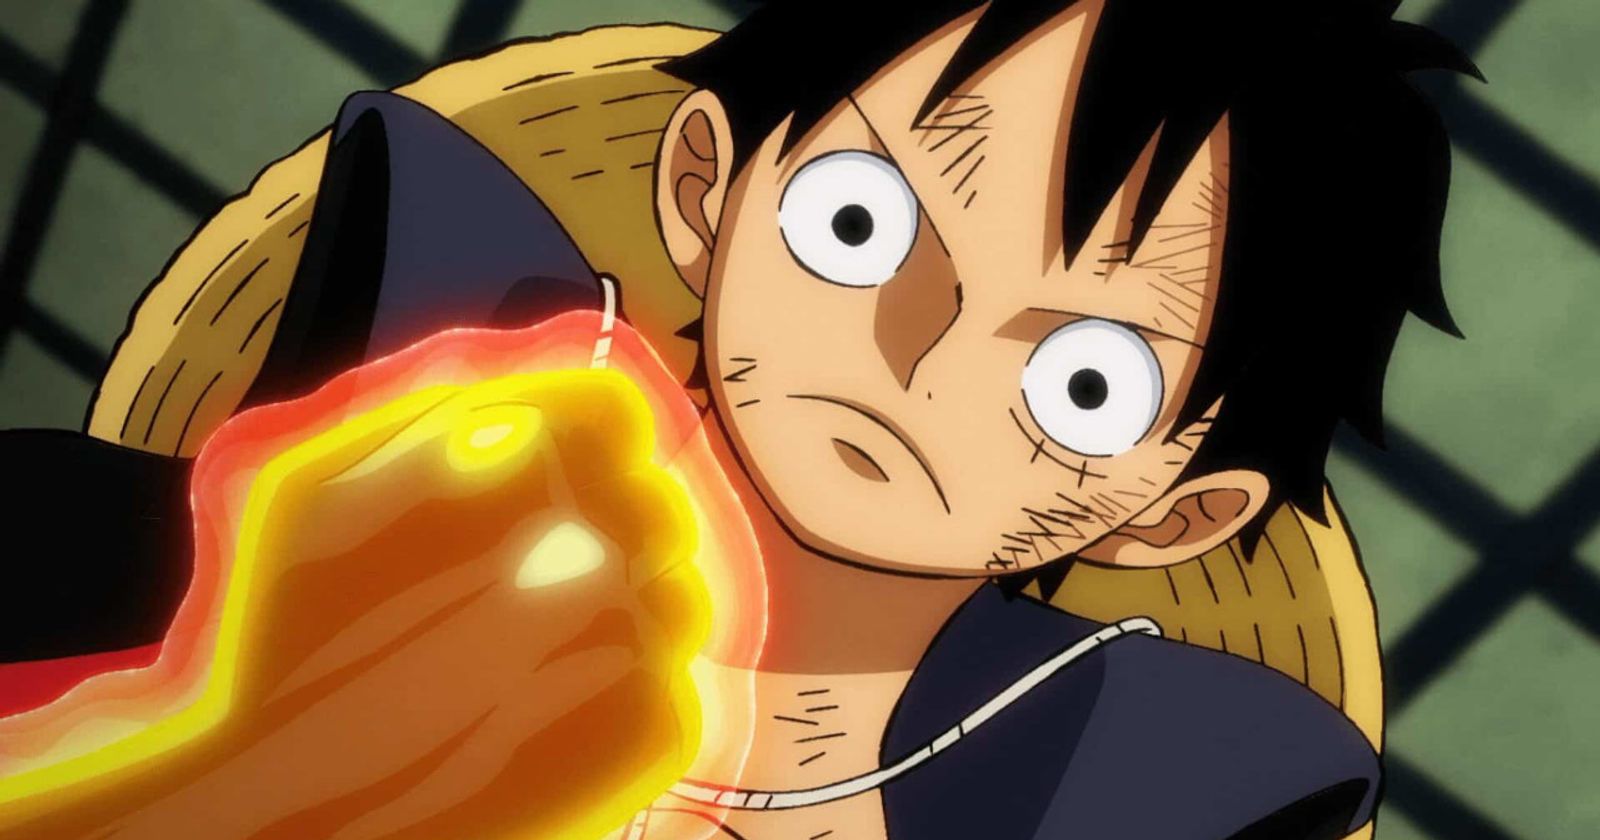 One Piece Promo Teases Luffy's 'Ridiculous' Gear 5 Power